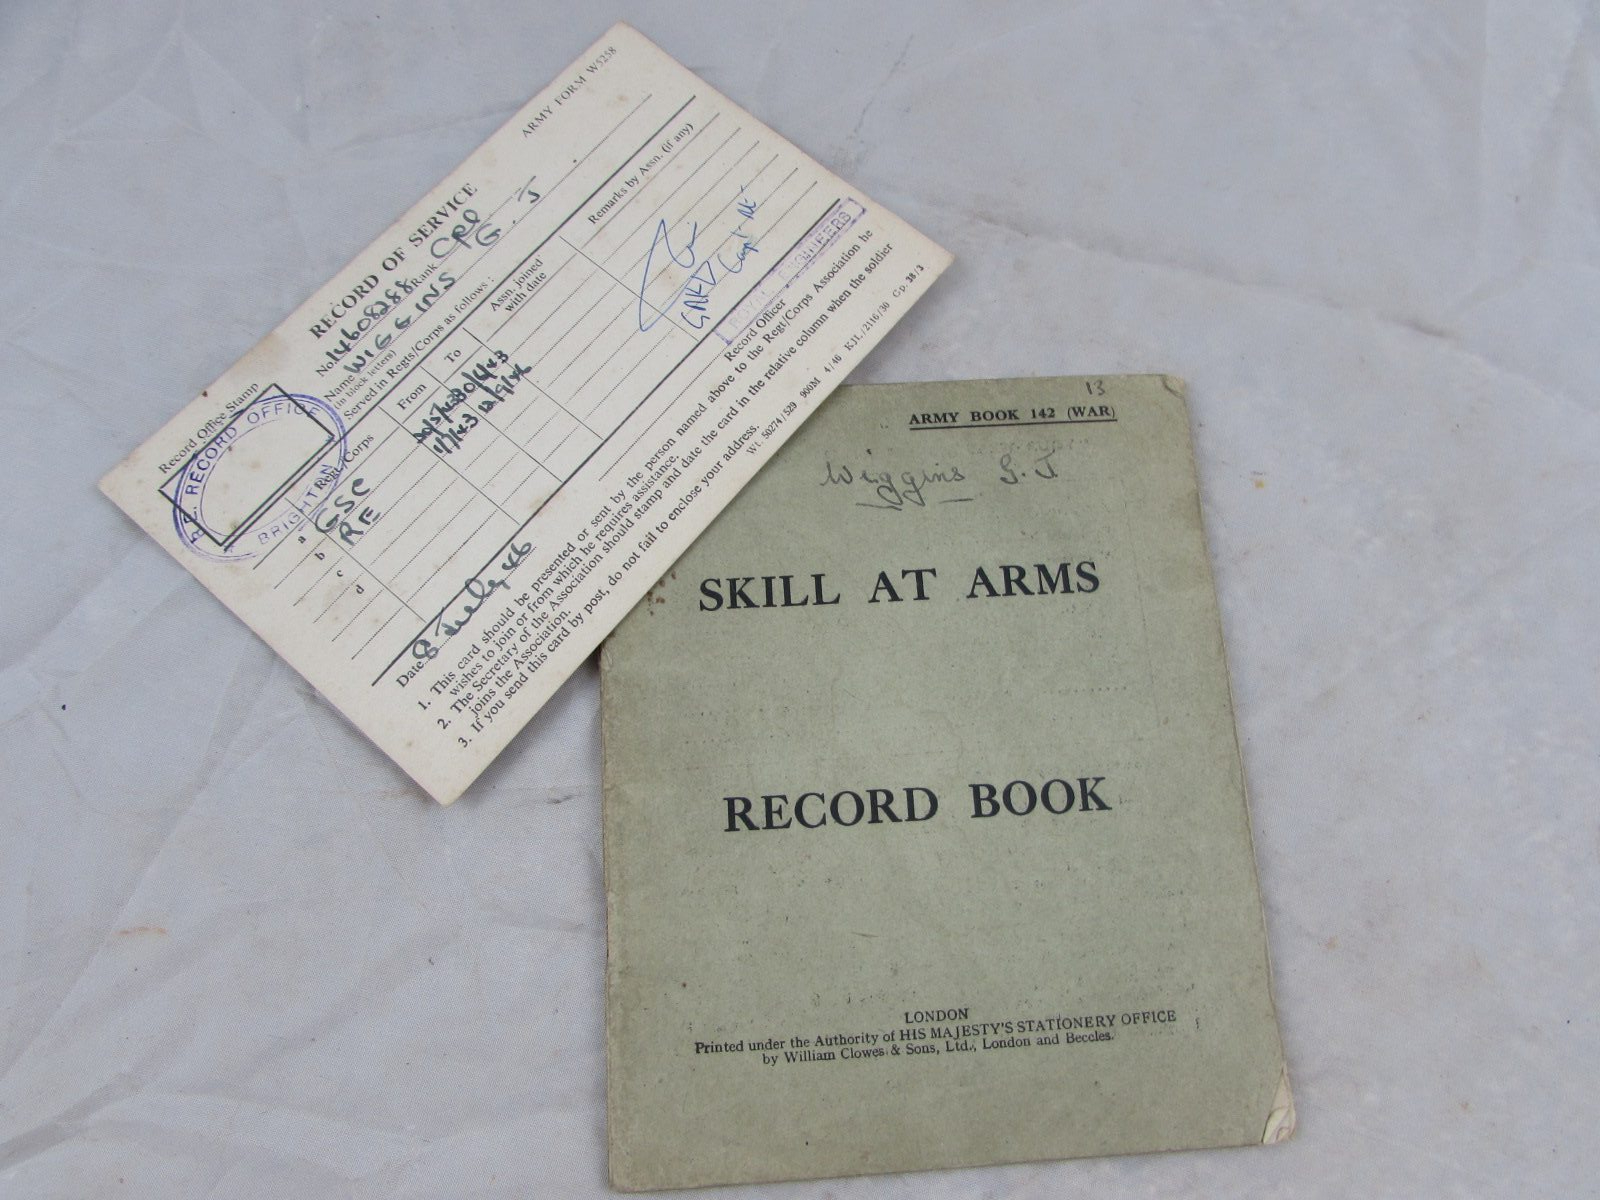 WW2 Skill At Arms Record Book